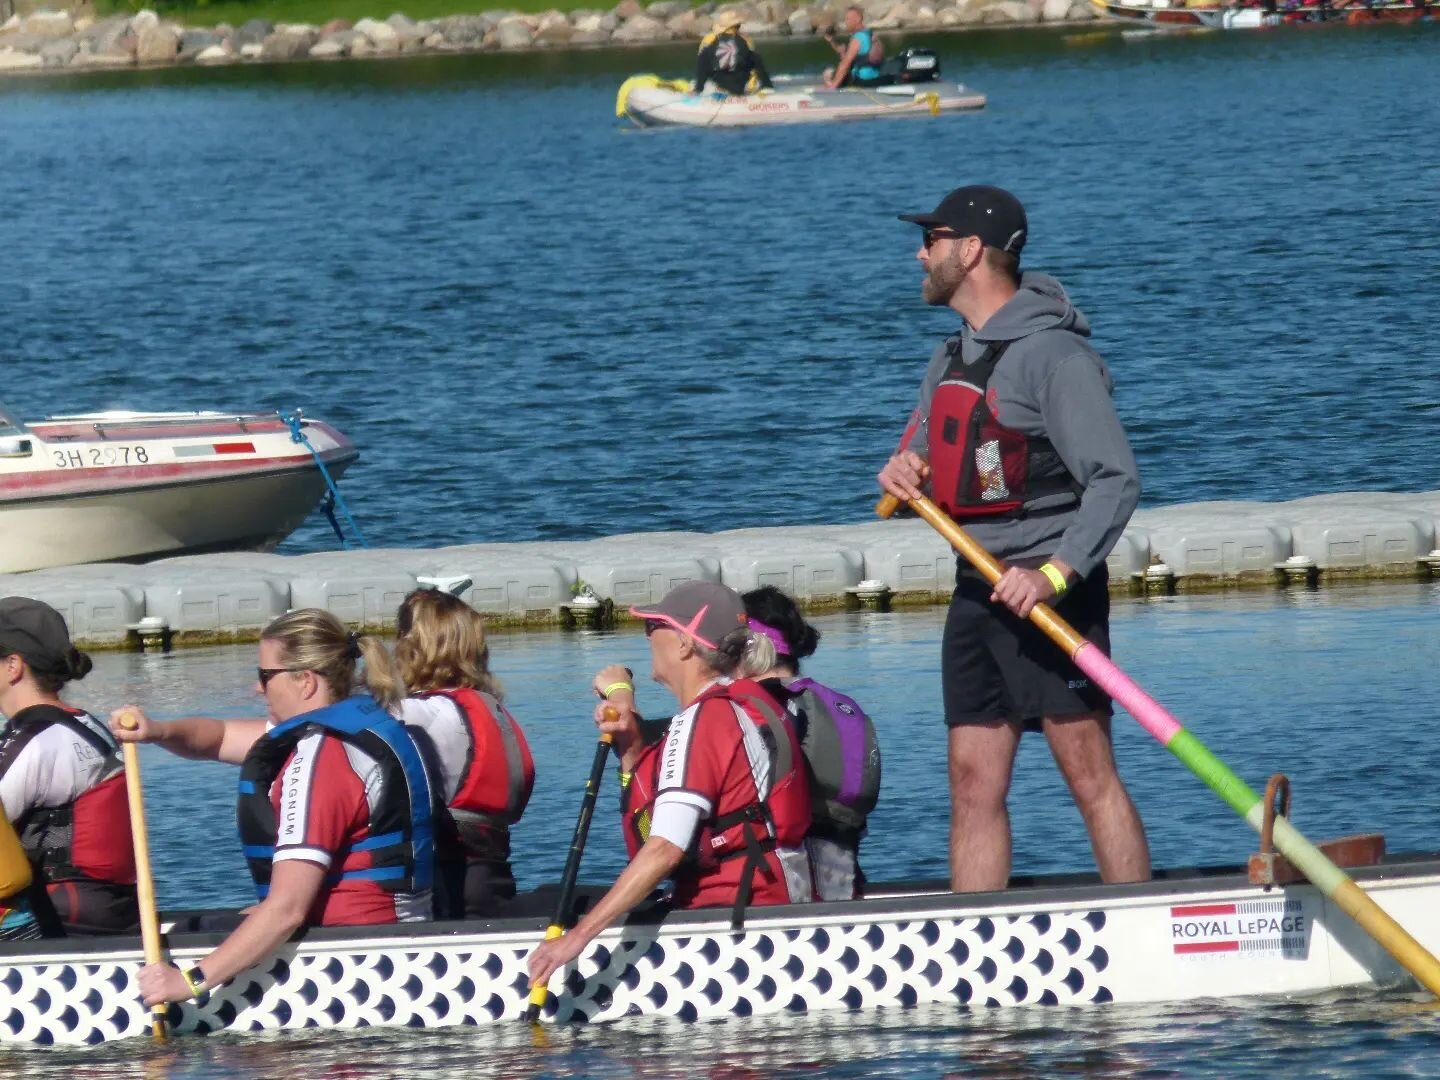 We're so thrilled to welcome back a longstanding Red Eye this season, @calgaryhotyoga who is also an incredible steers. Thanks Craig for helping us blaze straight down the race course last weekend! 
.
.
#lethdragonfest #yycdbs #paddlesupyyc #redeyesd